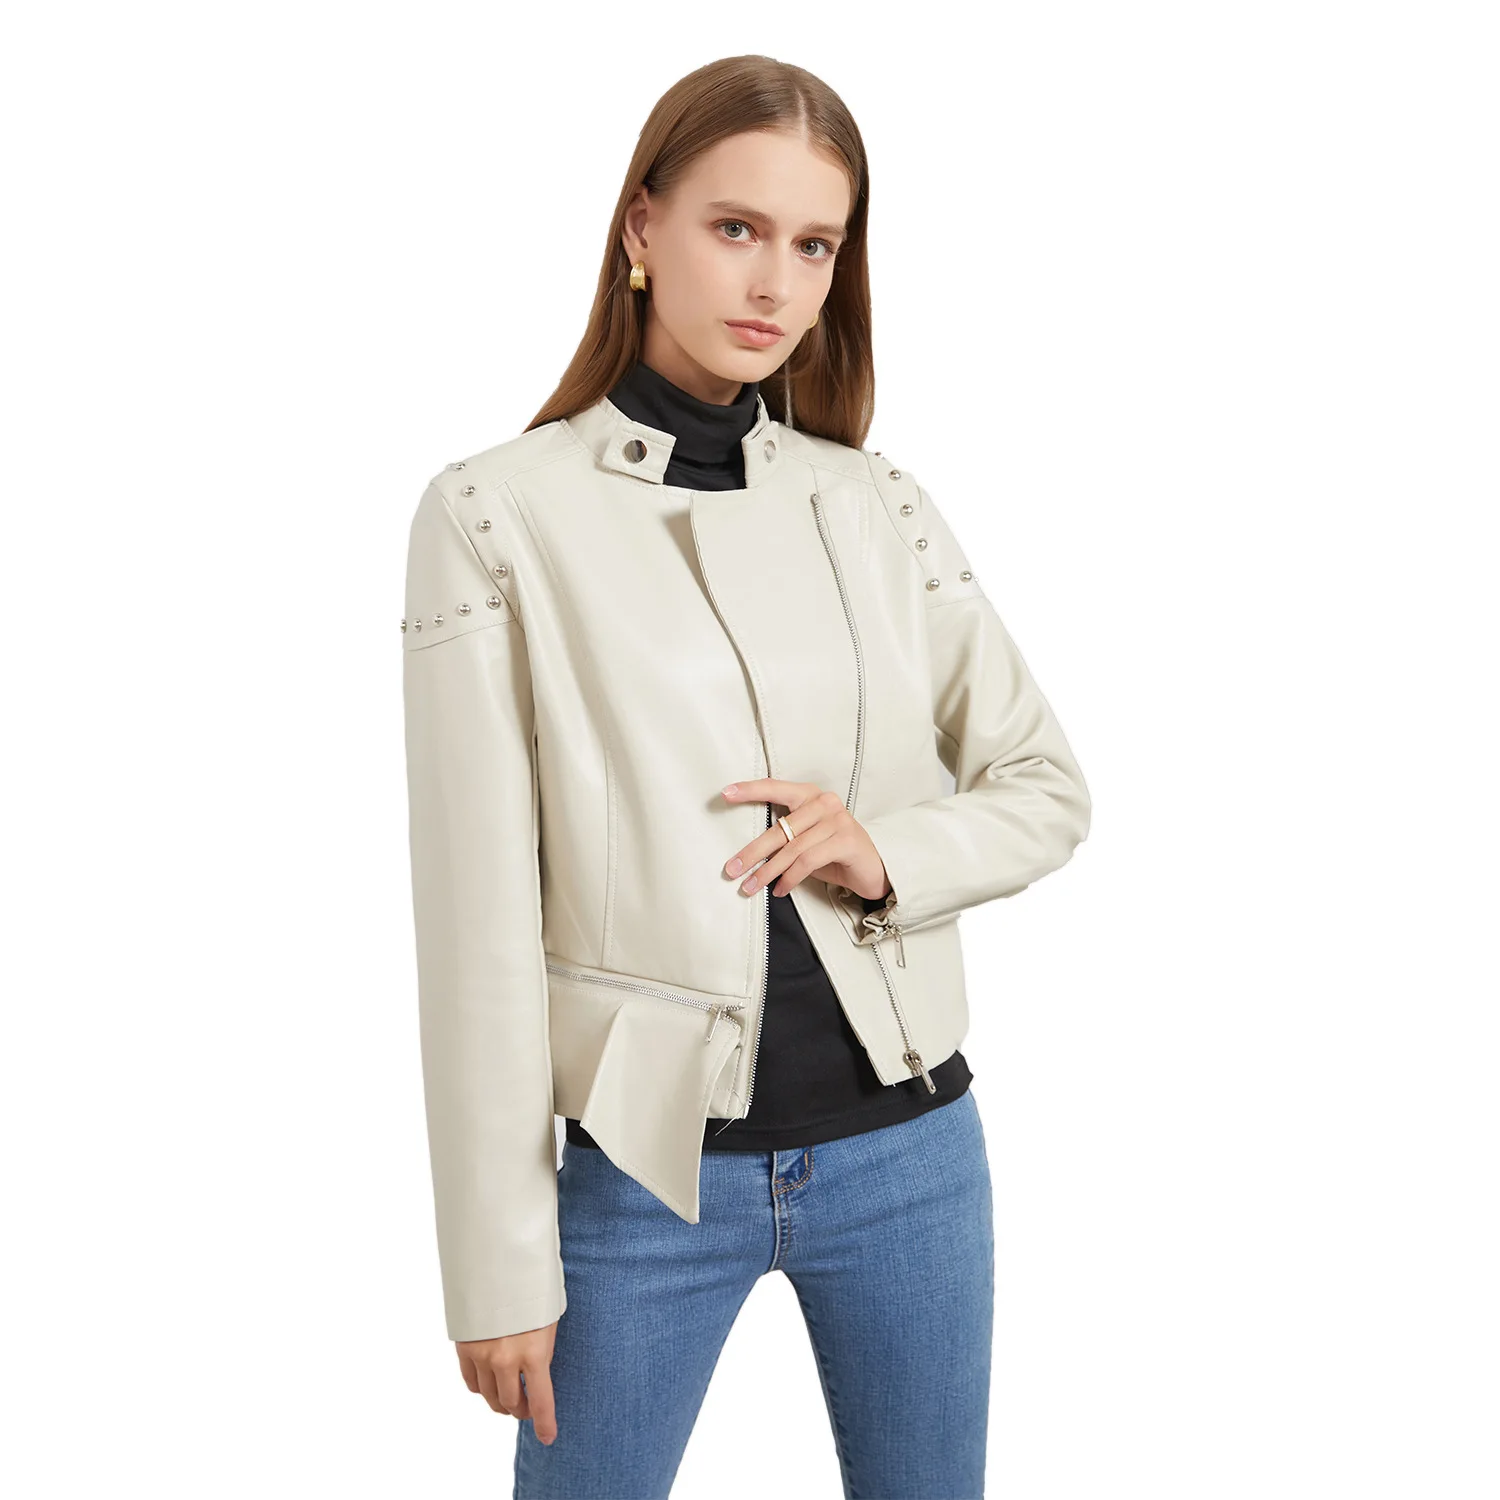 2021 New Rivet Fashion Stand Collar Leather Clothes Women's Solid Color Jacket Lddy's Spring And Autumn Coat Women's Irregular